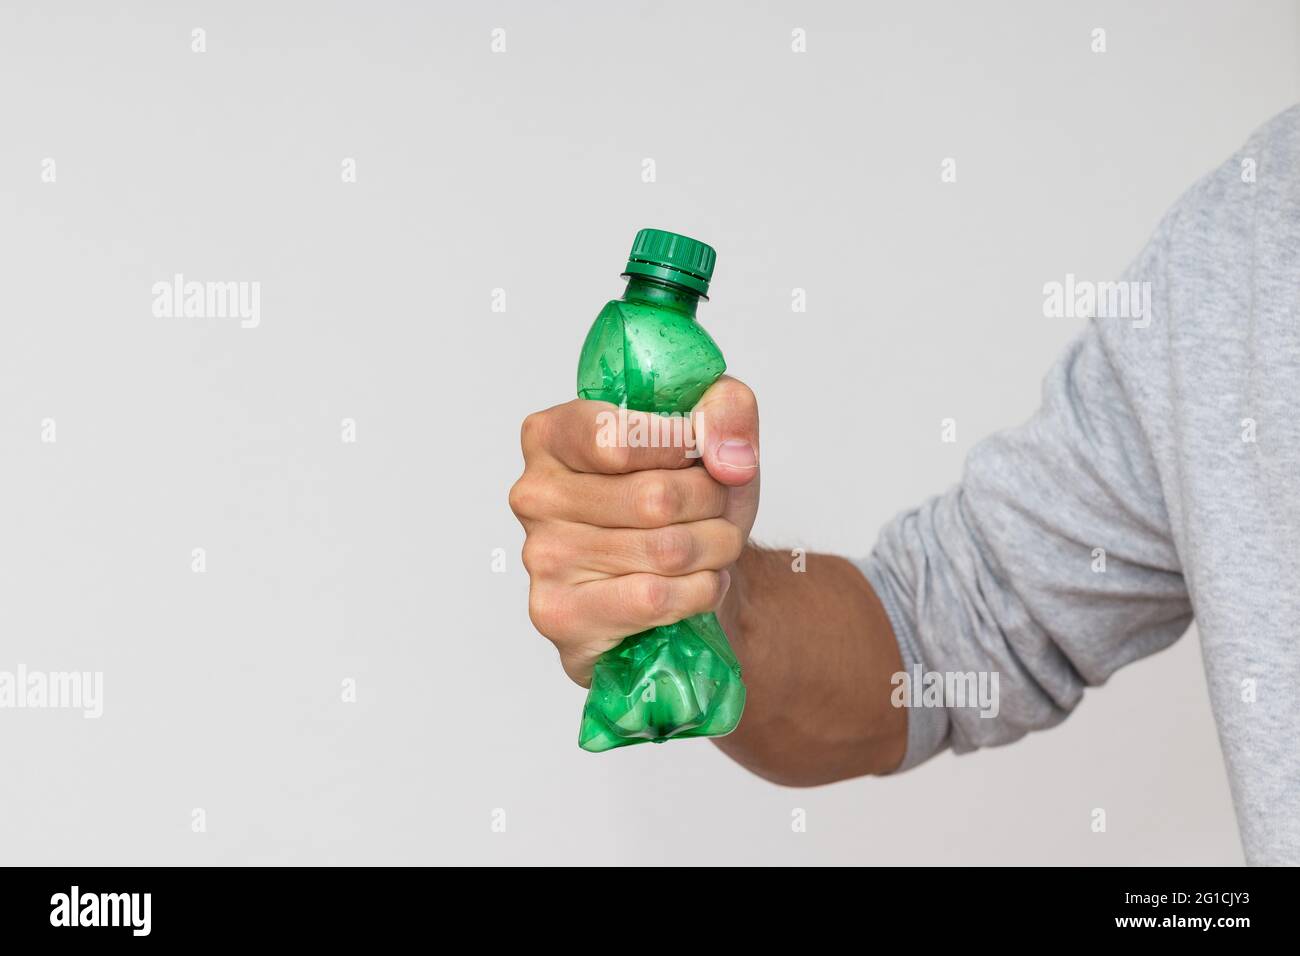 https://c8.alamy.com/comp/2G1CJY3/plastic-bottle-recycling-or-pollution-concept-hand-squeezing-or-crushing-a-green-plastic-bottle-on-white-background-2G1CJY3.jpg